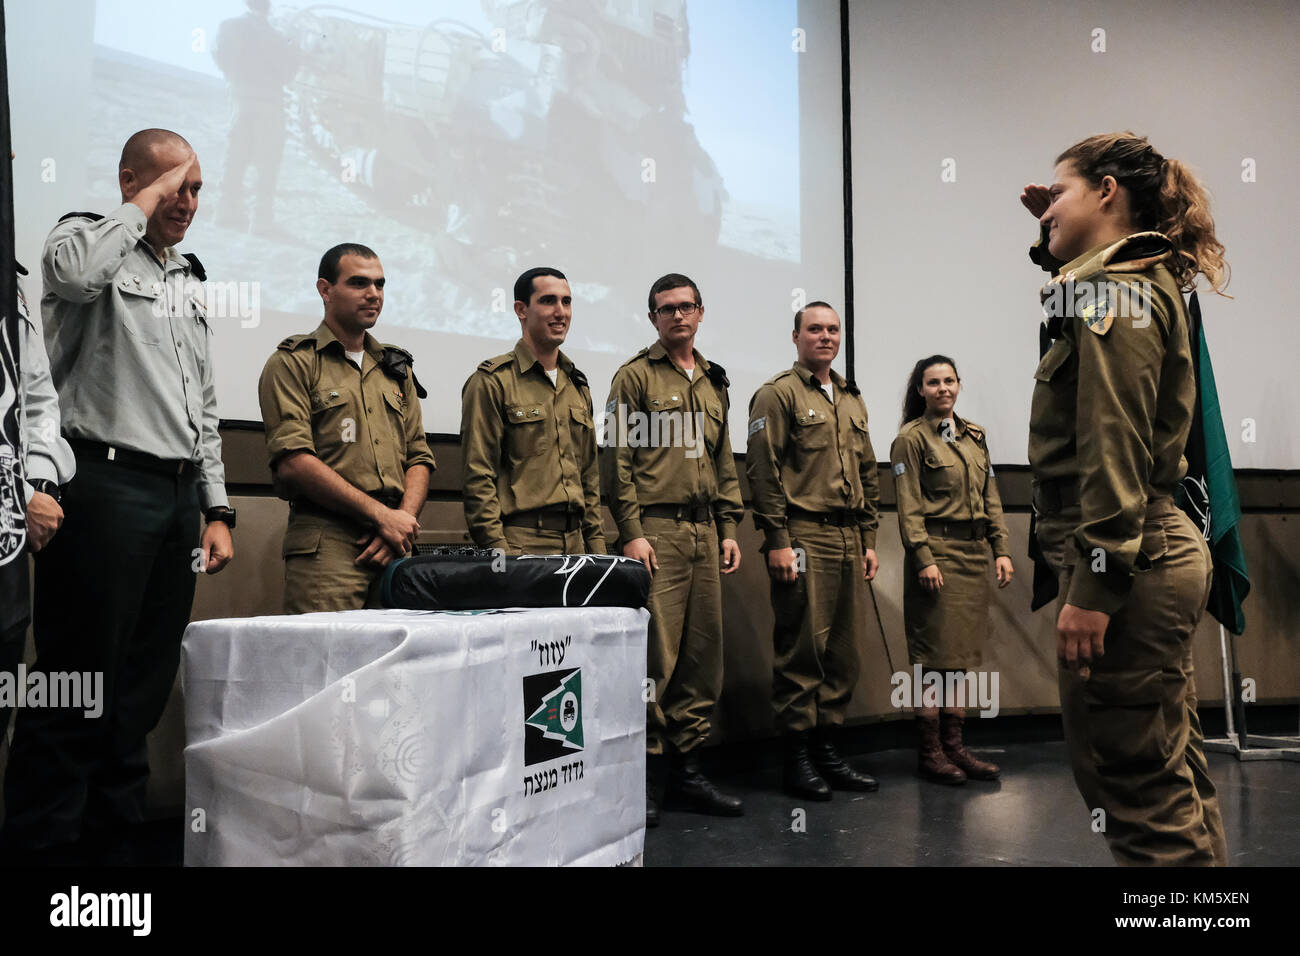 Latrun, Israel. 5th Dec, 2017. 13 female IDF soldiers graduate tank crew training at a ceremony at Yad LaShiryon, the Armored Corps Memorial Site at Latrun. These are the first women to serve in the Armored Corps as part of a pilot program. Having concluded tank training on Merkava Mark 3 tanks, female soldiers are destined to serve in the army's 80th Division, responsible for the southern Negev and Arava deserts, securing Israel's borders with Egypt and Jordan. Credit: Nir Alon/Alamy Live News Stock Photo